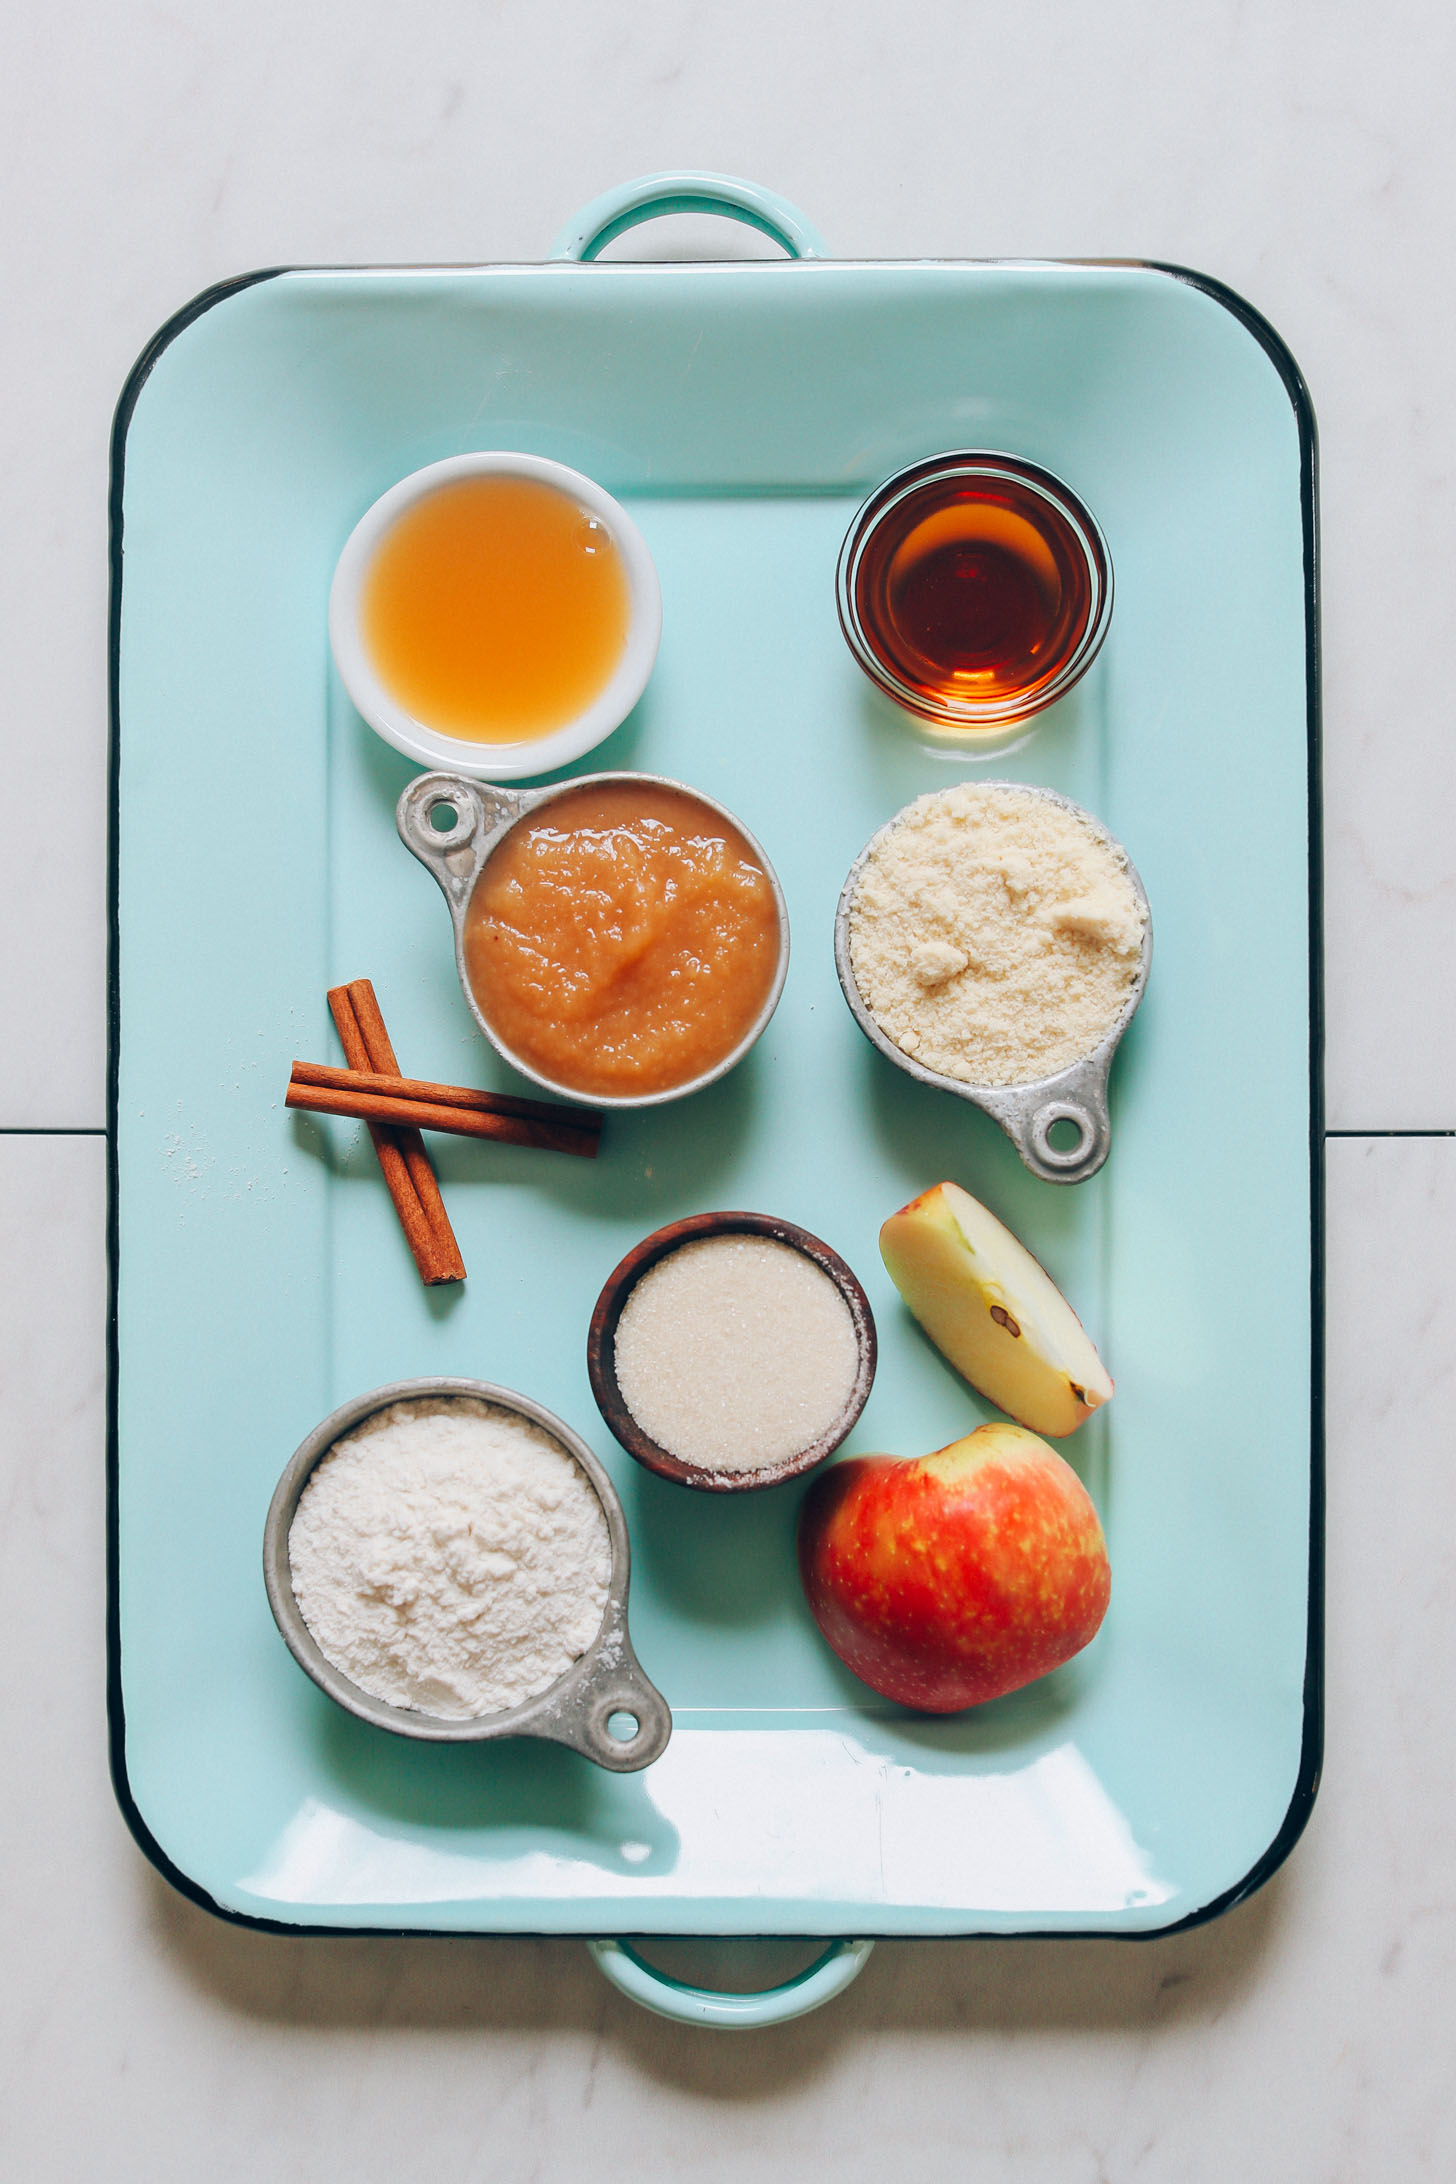 Tray with ingredients for making our gluten-free vegan Apple Cider Donuts recipe